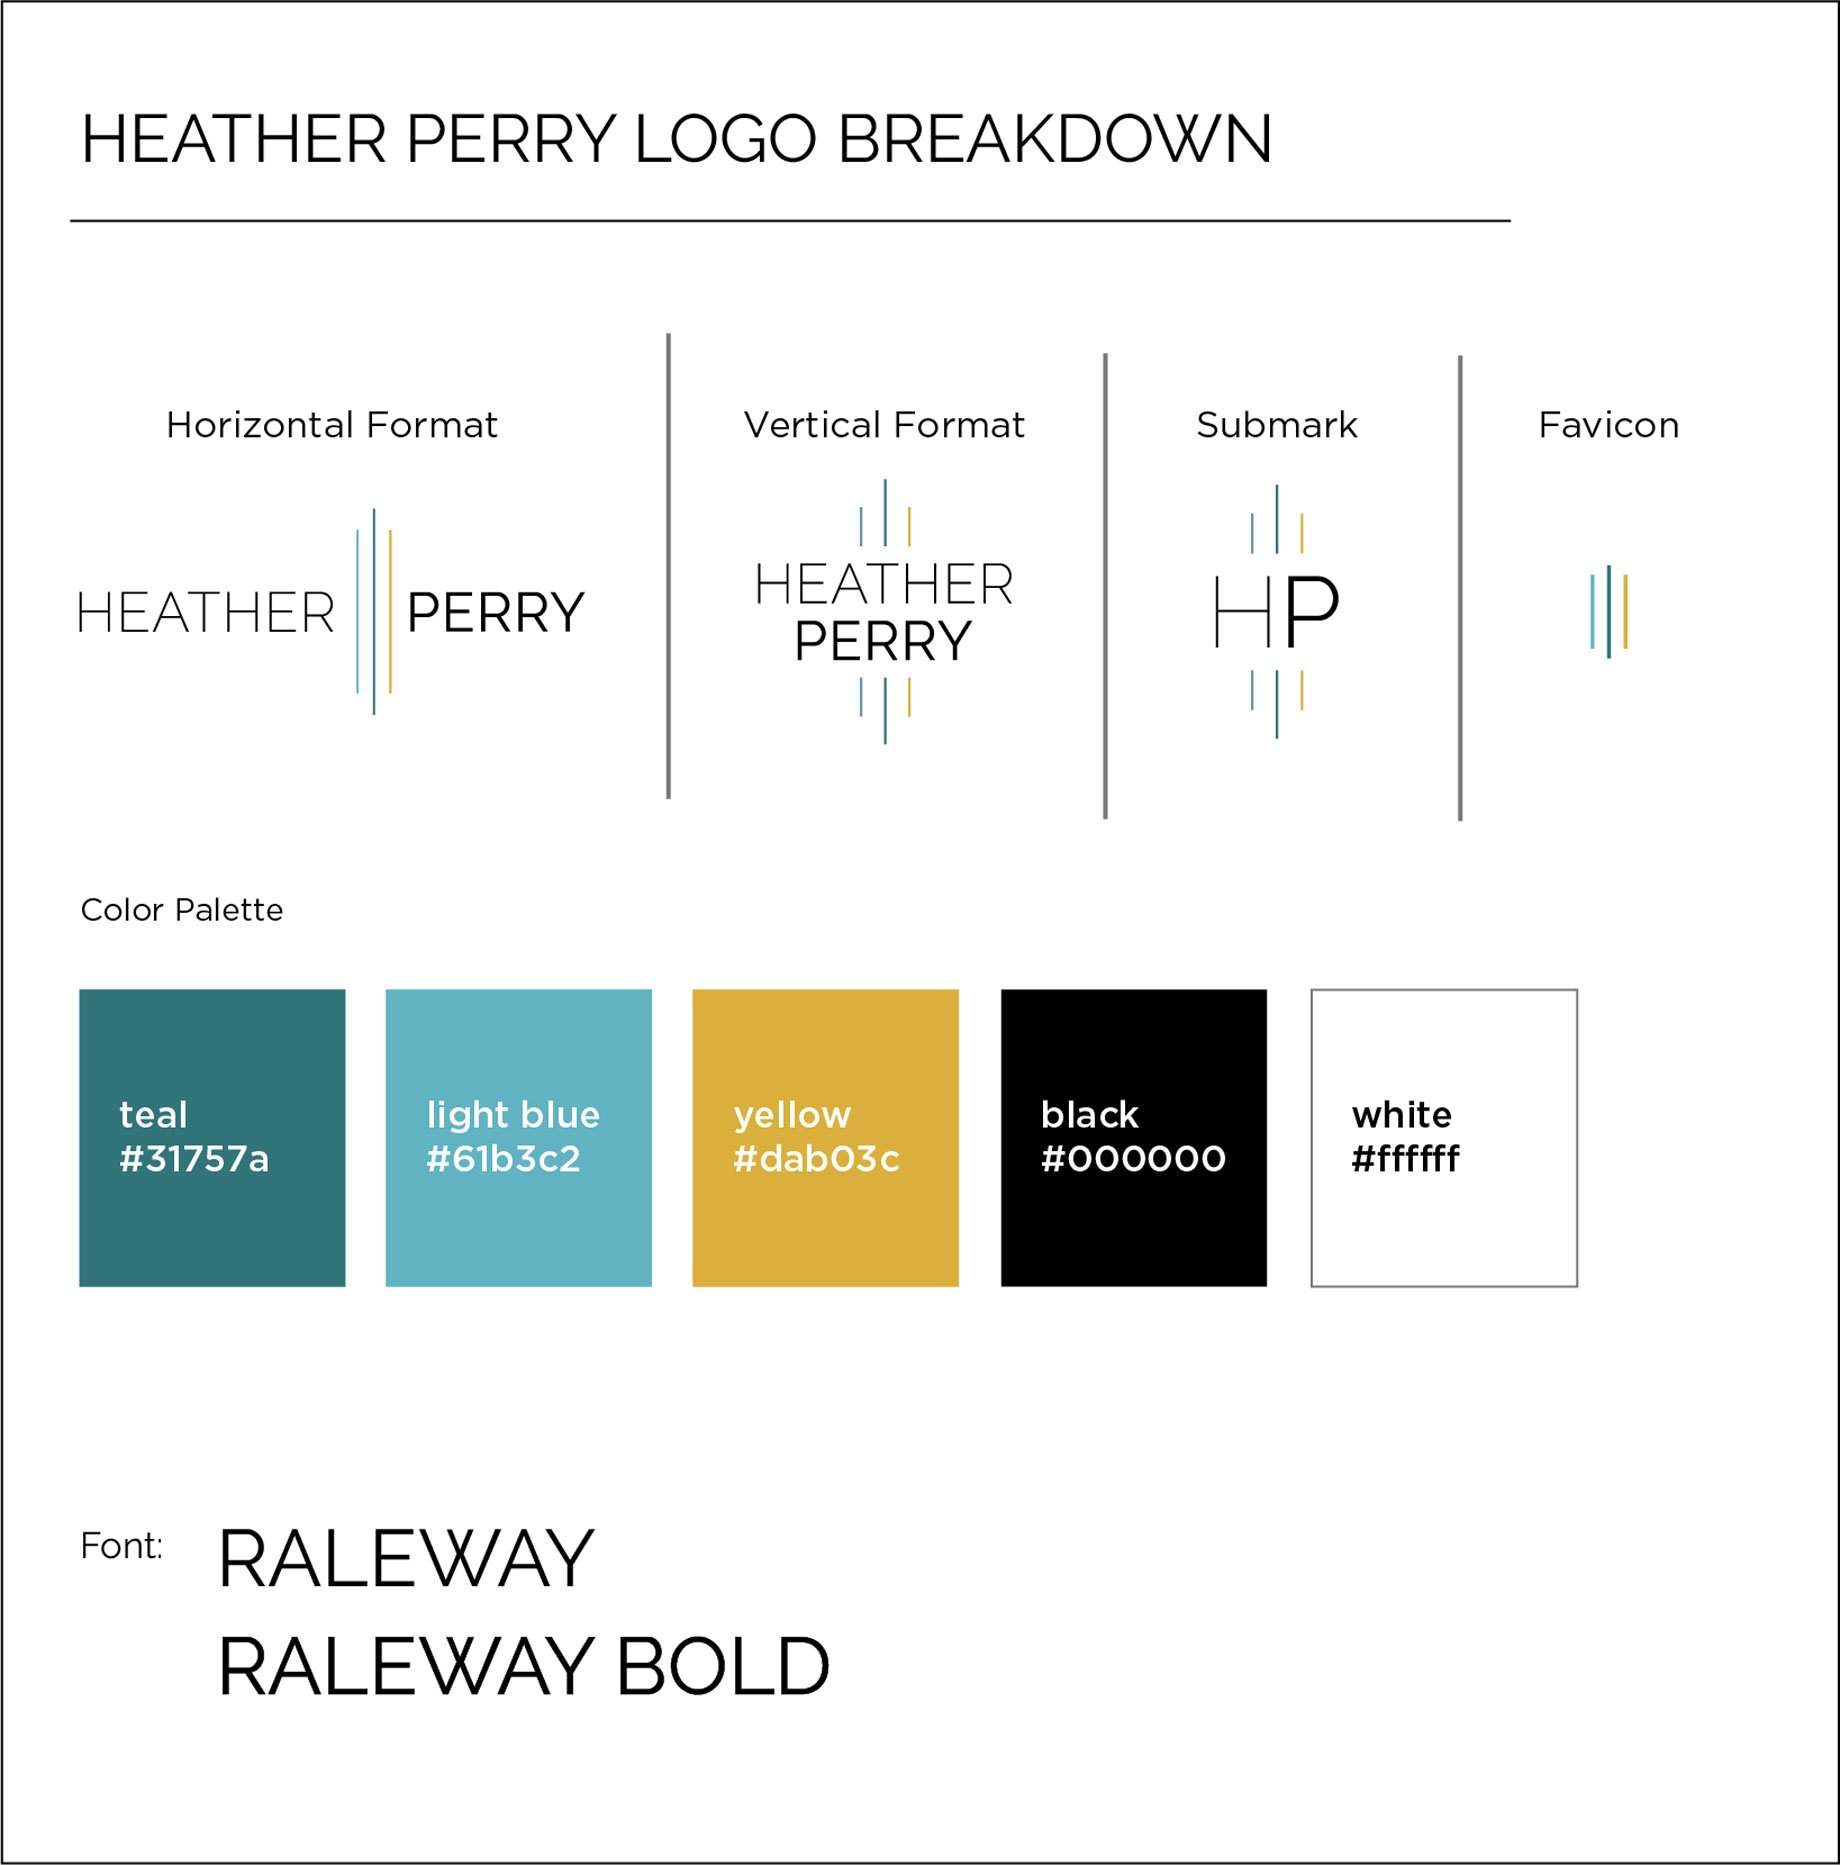 A style guide we developed for Heather Perry’s branding overhaul showing horizontal and vertical logos, a submark, favicon, the color palette, and fonts.